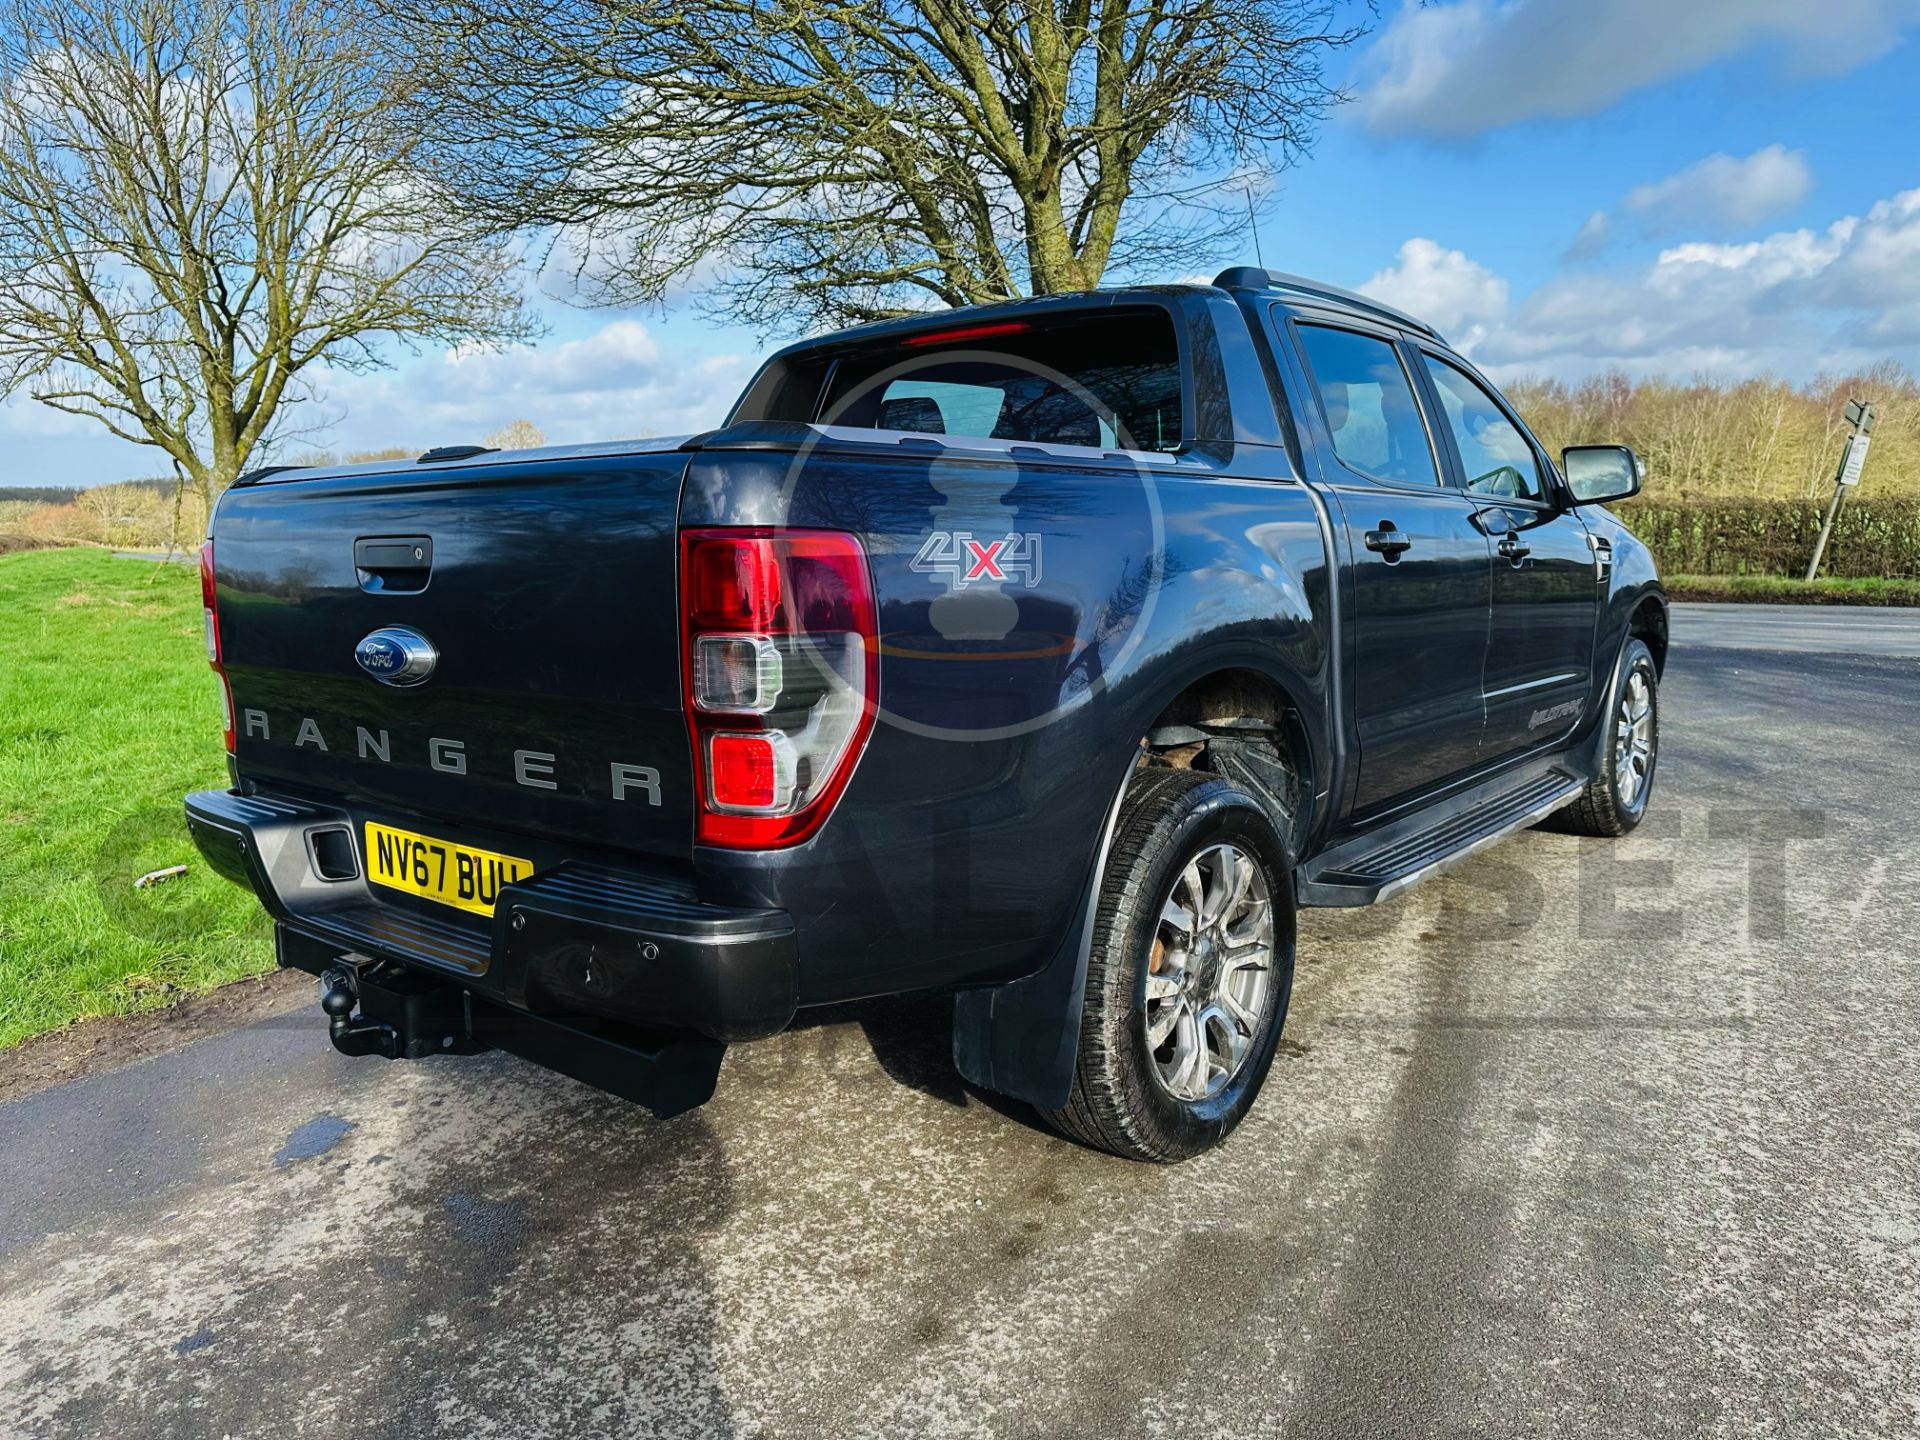 FORD RANGER *WILDTRAK EDITION* DOUBLE CAB PICK-UP (2018 - EURO 6) 3.2 TDCI - AUTOMATIC (1 OWNER) - Image 10 of 37